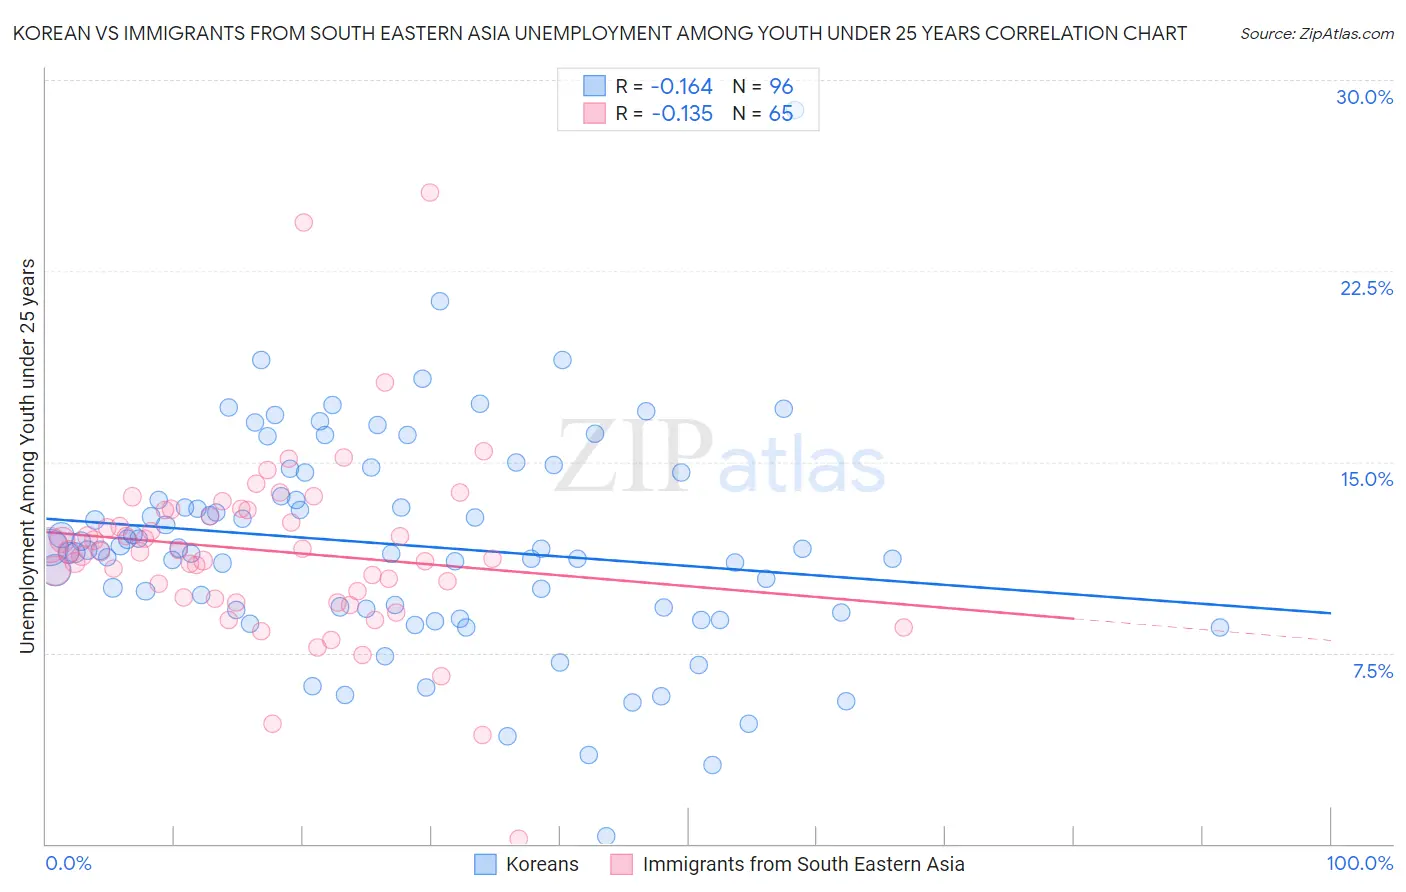 Korean vs Immigrants from South Eastern Asia Unemployment Among Youth under 25 years